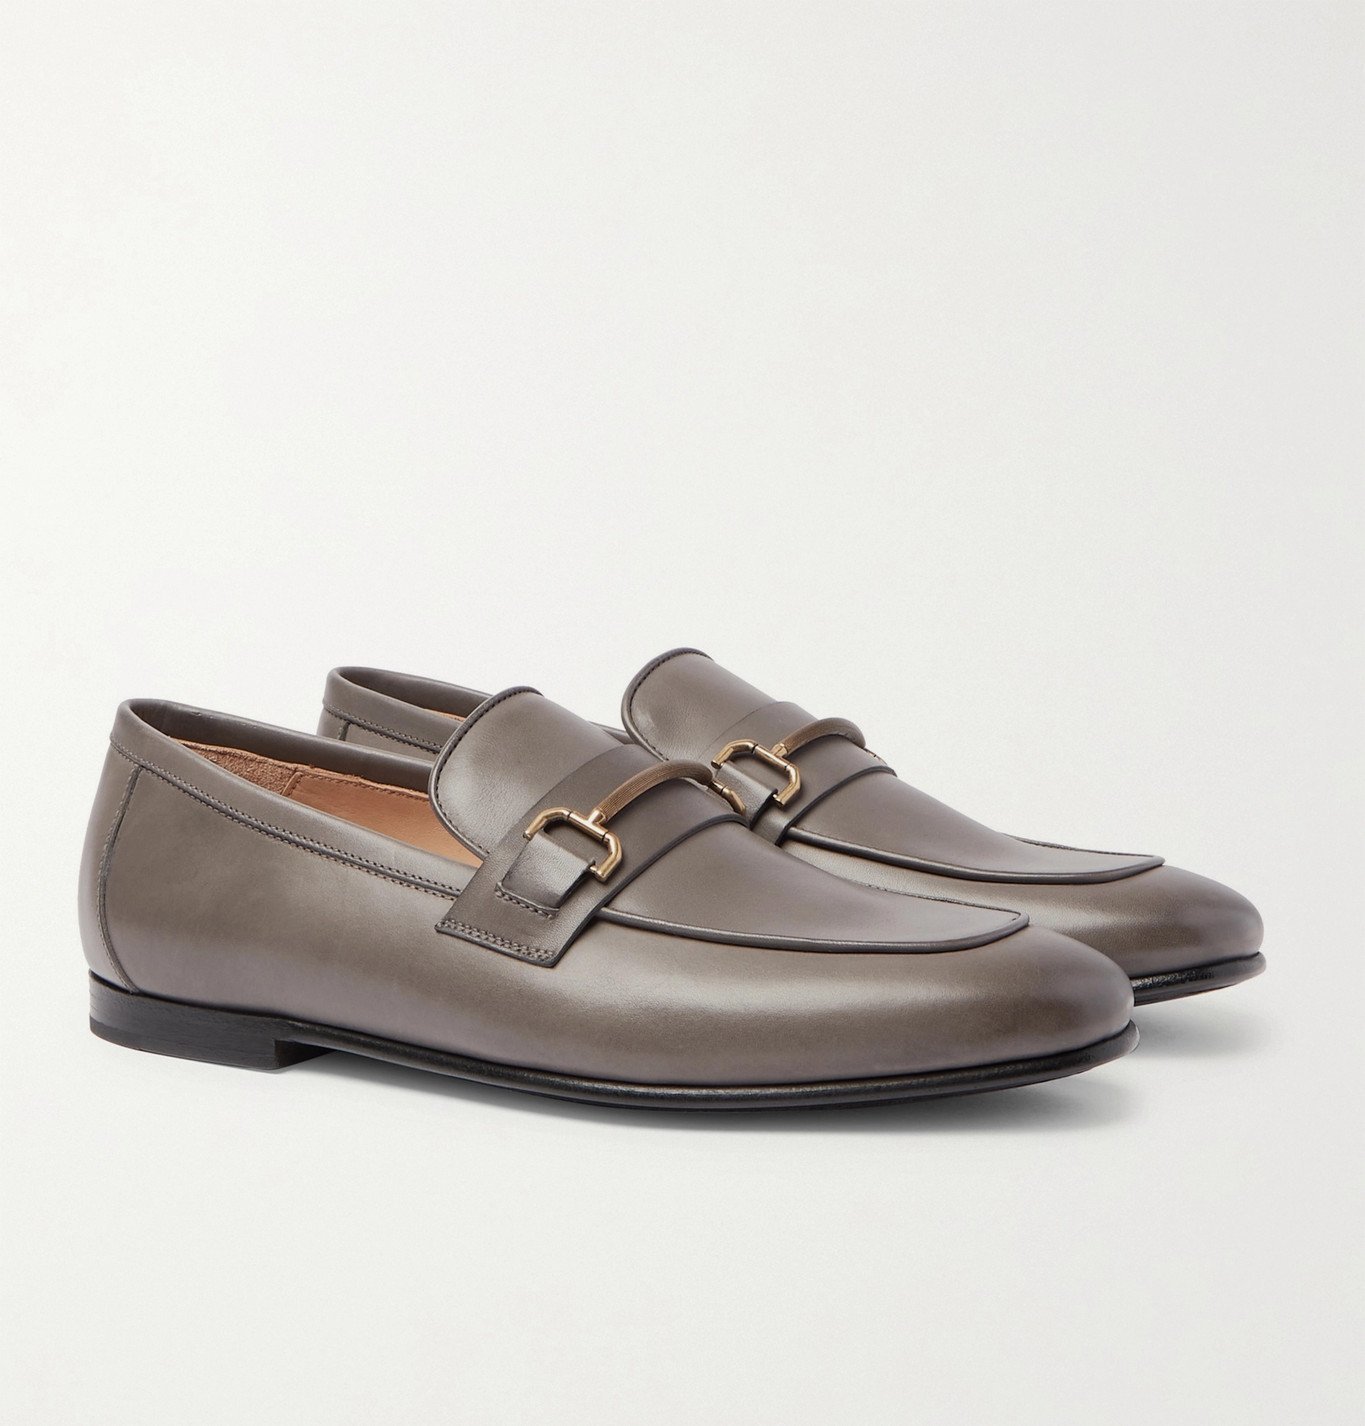 DUNHILL - Chiltern Leather Loafers - Gray Dunhill